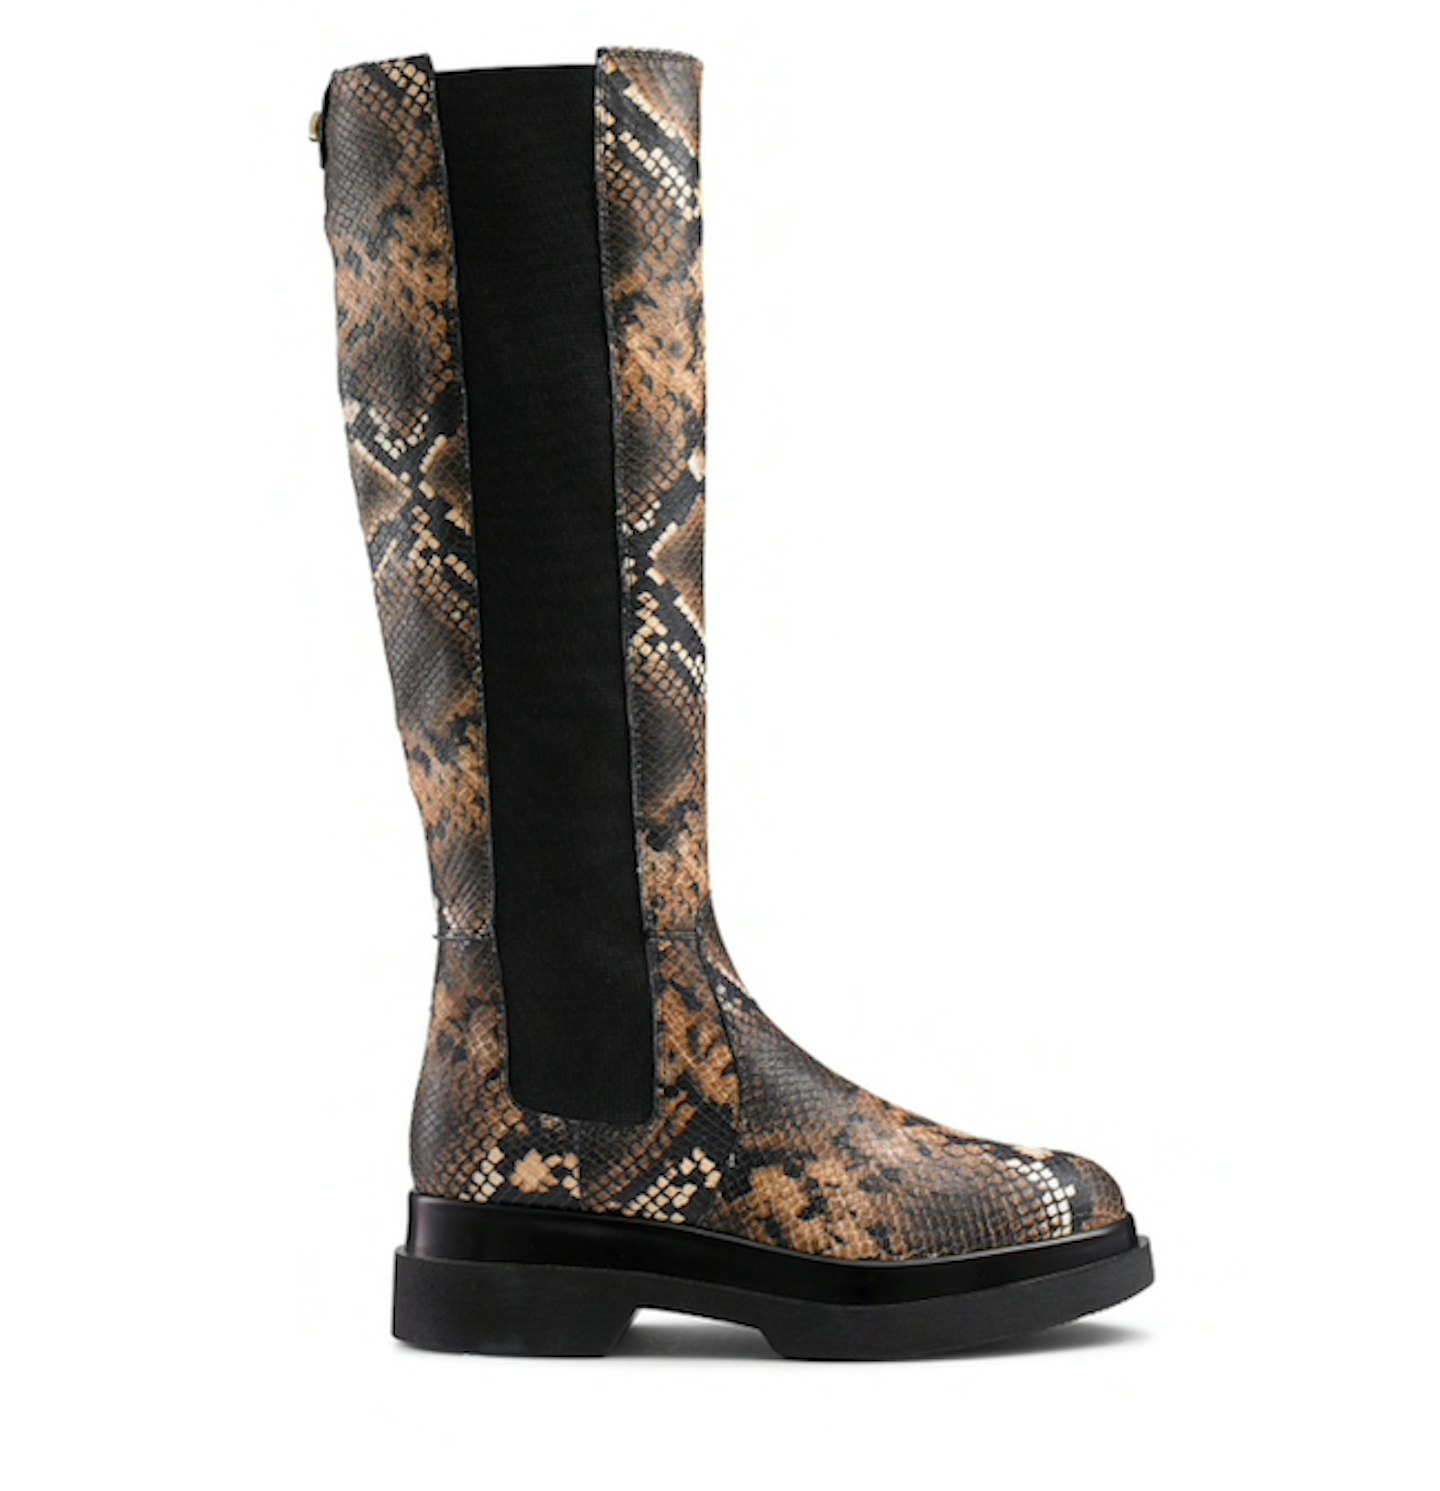 Russell & Bromley, Everglade Knee High Chelsea, £315